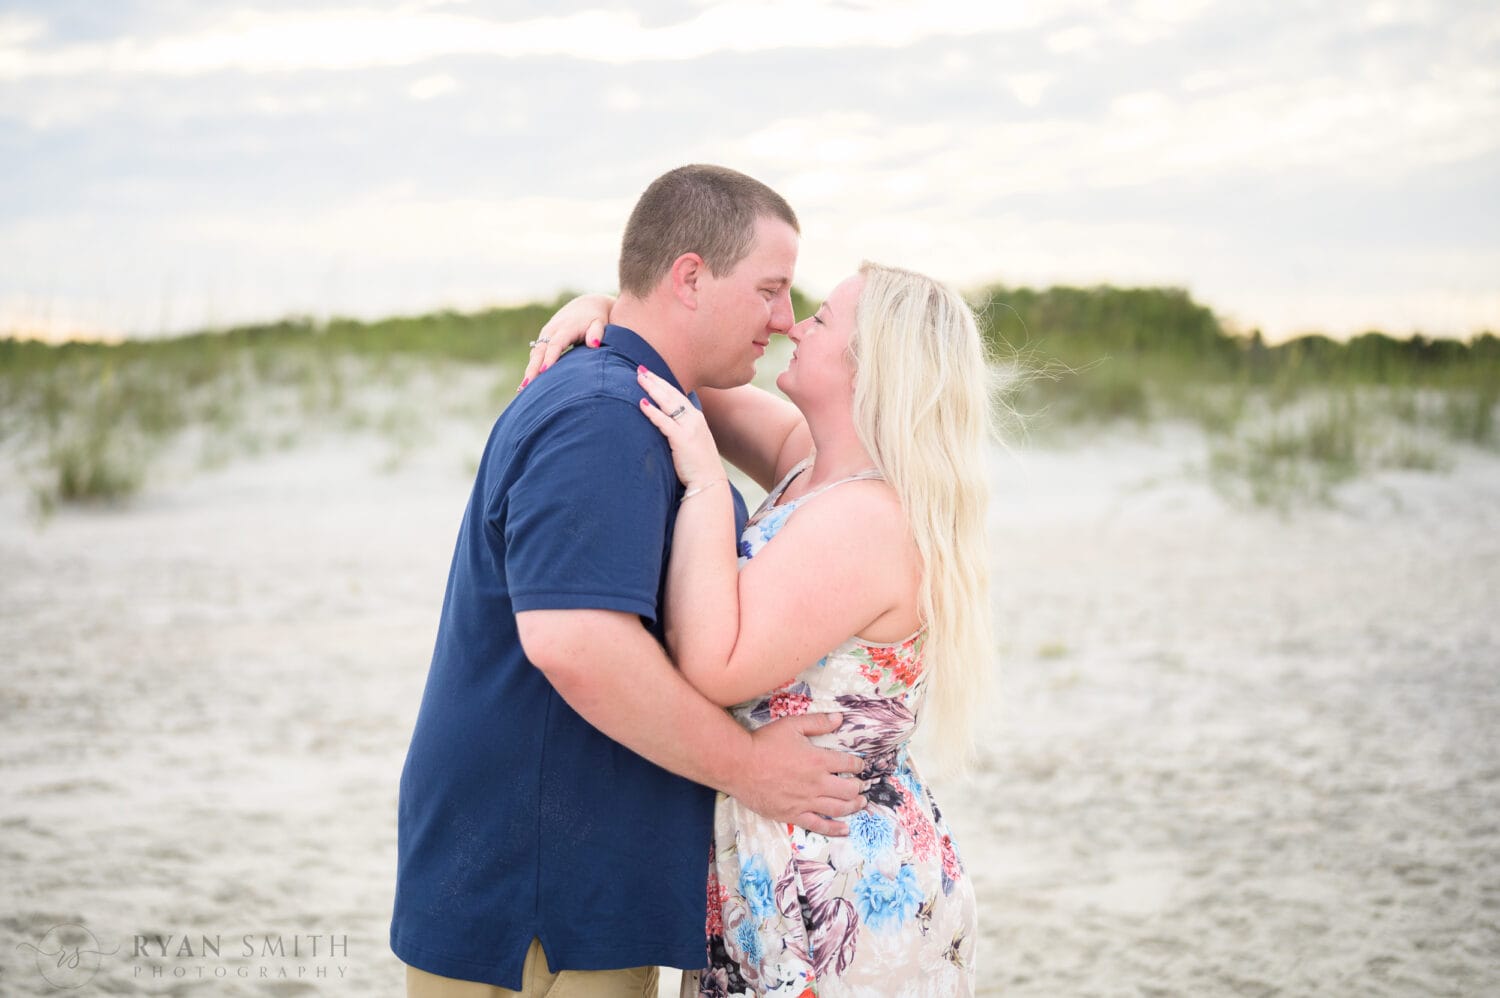 Touching noses in the sunset - Huntington Beach State Park - Myrtle Beach